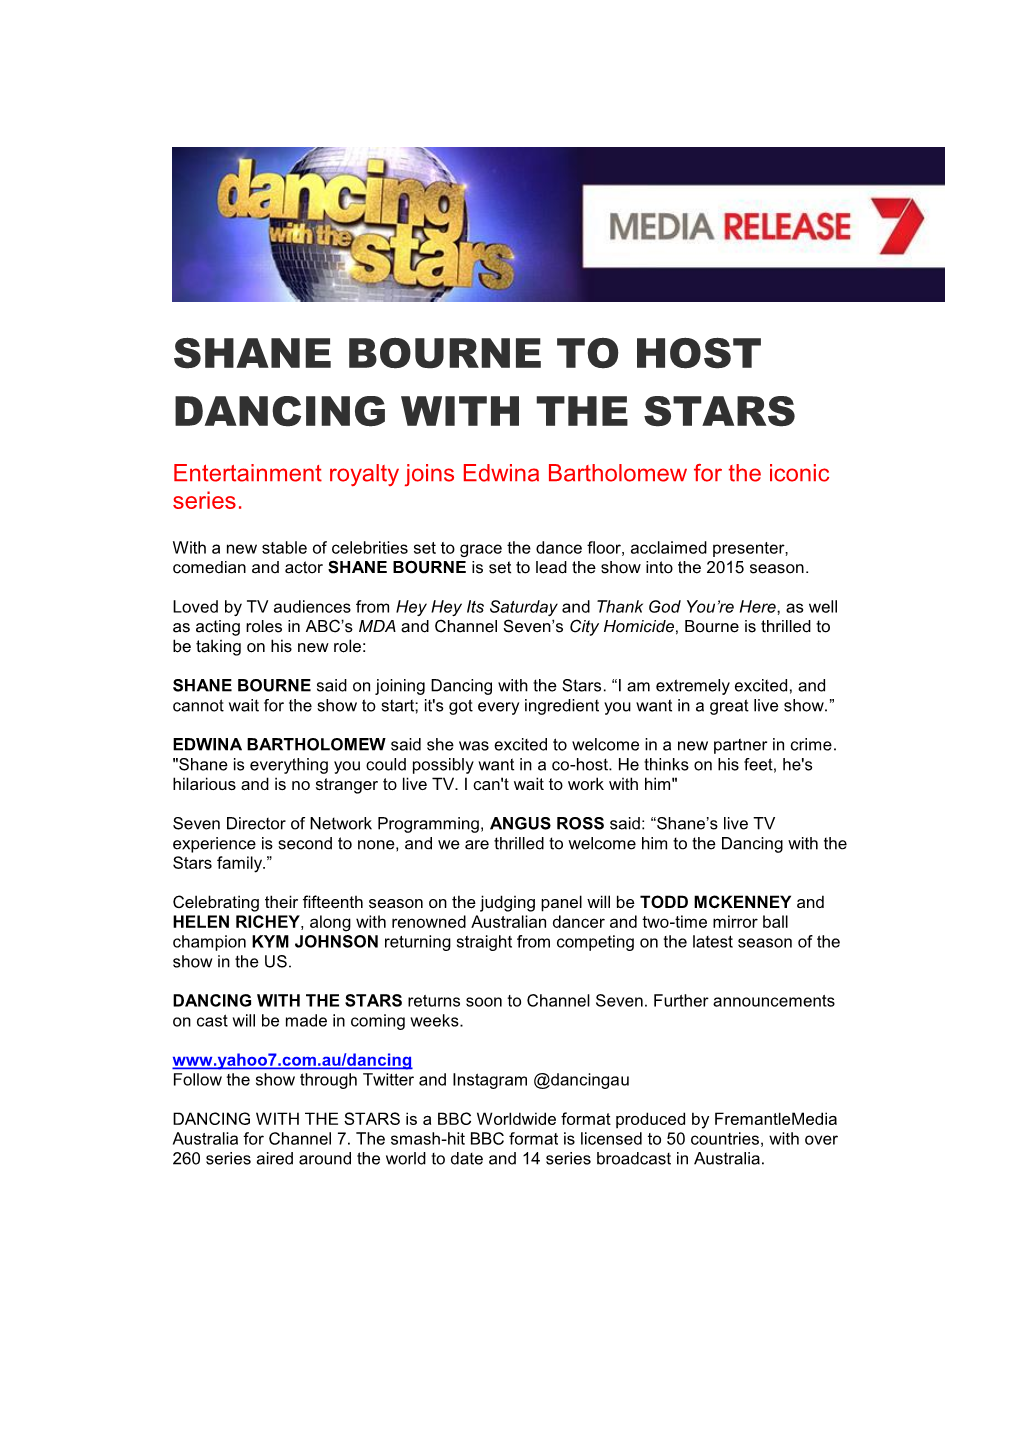 Shane Bourne to Host Dancing with the Stars